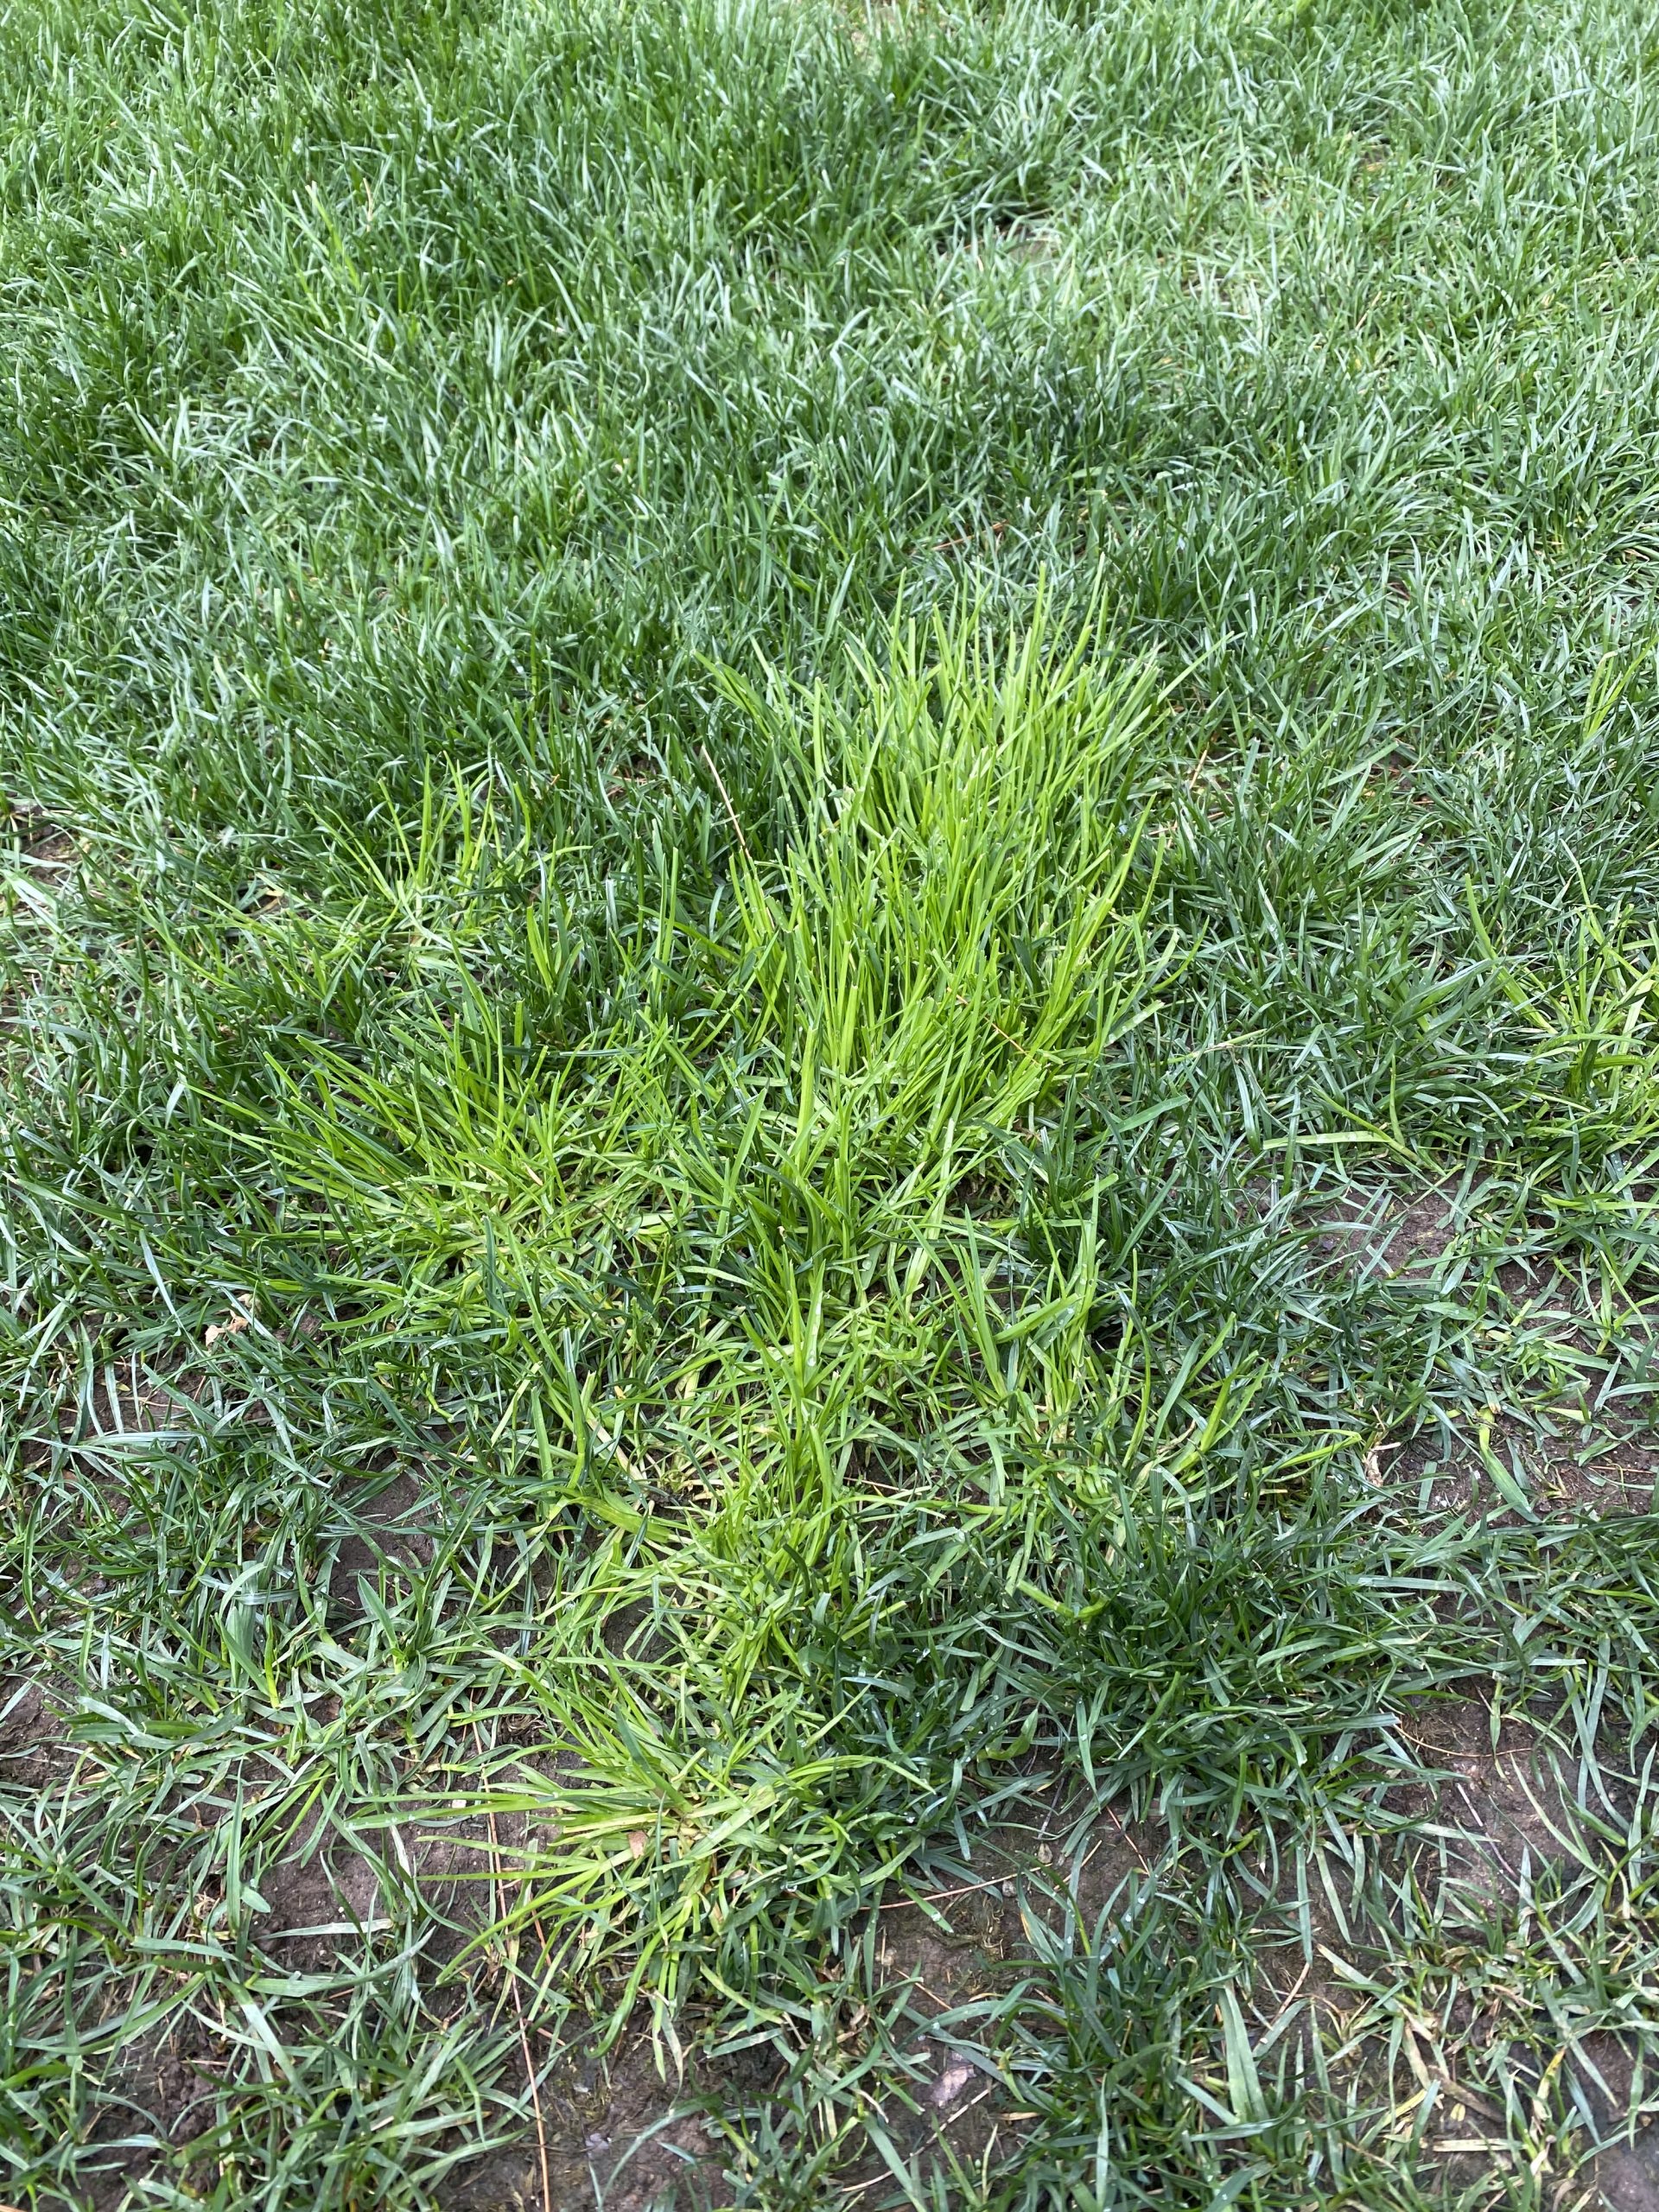 Poa Trivialis - The Ultimate Guide To Rough Bluegrass - A Complete Guide To  Poa Triv (Rough Bluegrass) Lawn Phix